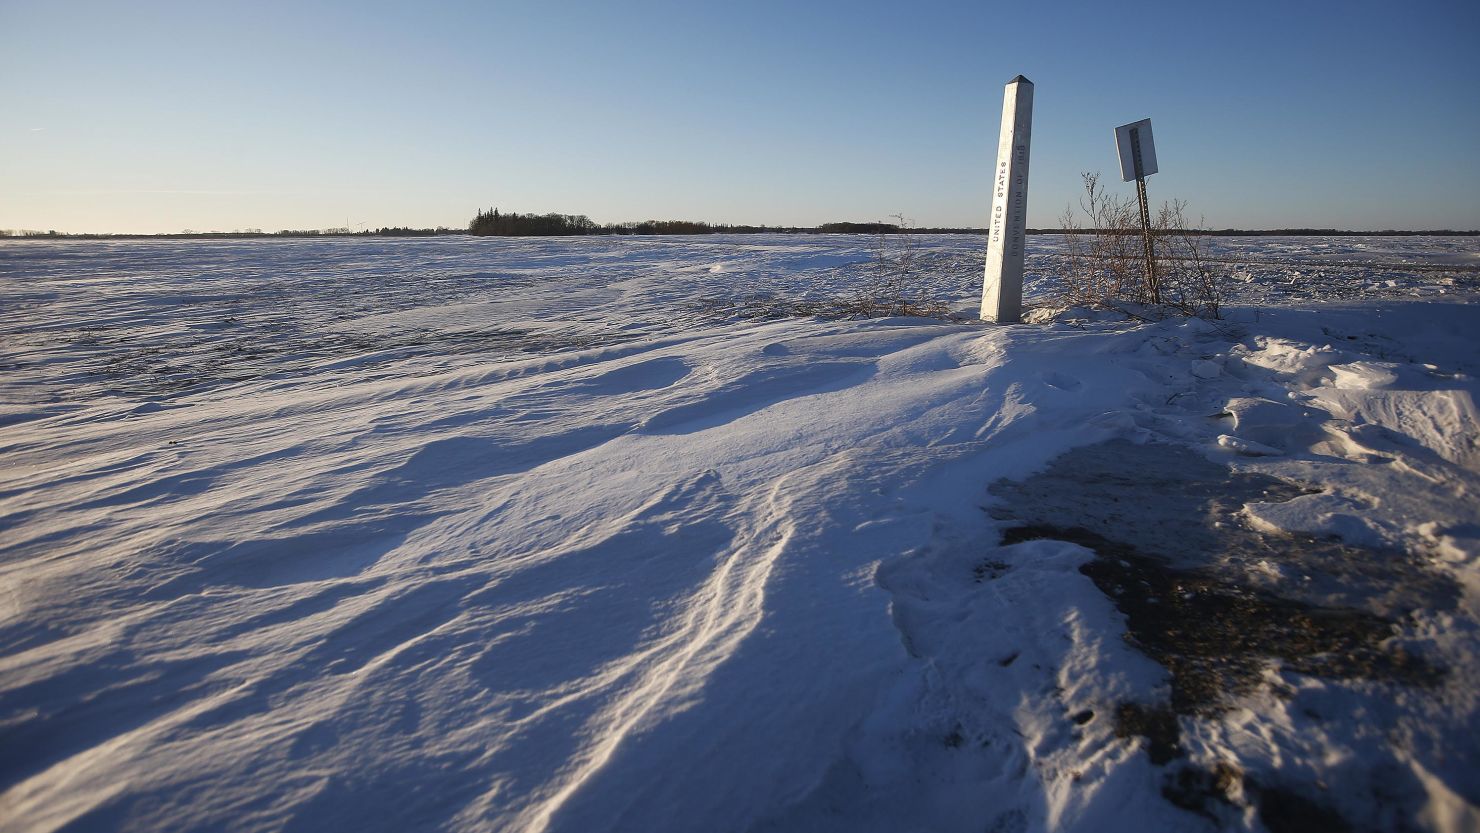 Police say four bodies were found just yards away from the US-Canada border near Emerson, Manitoba.